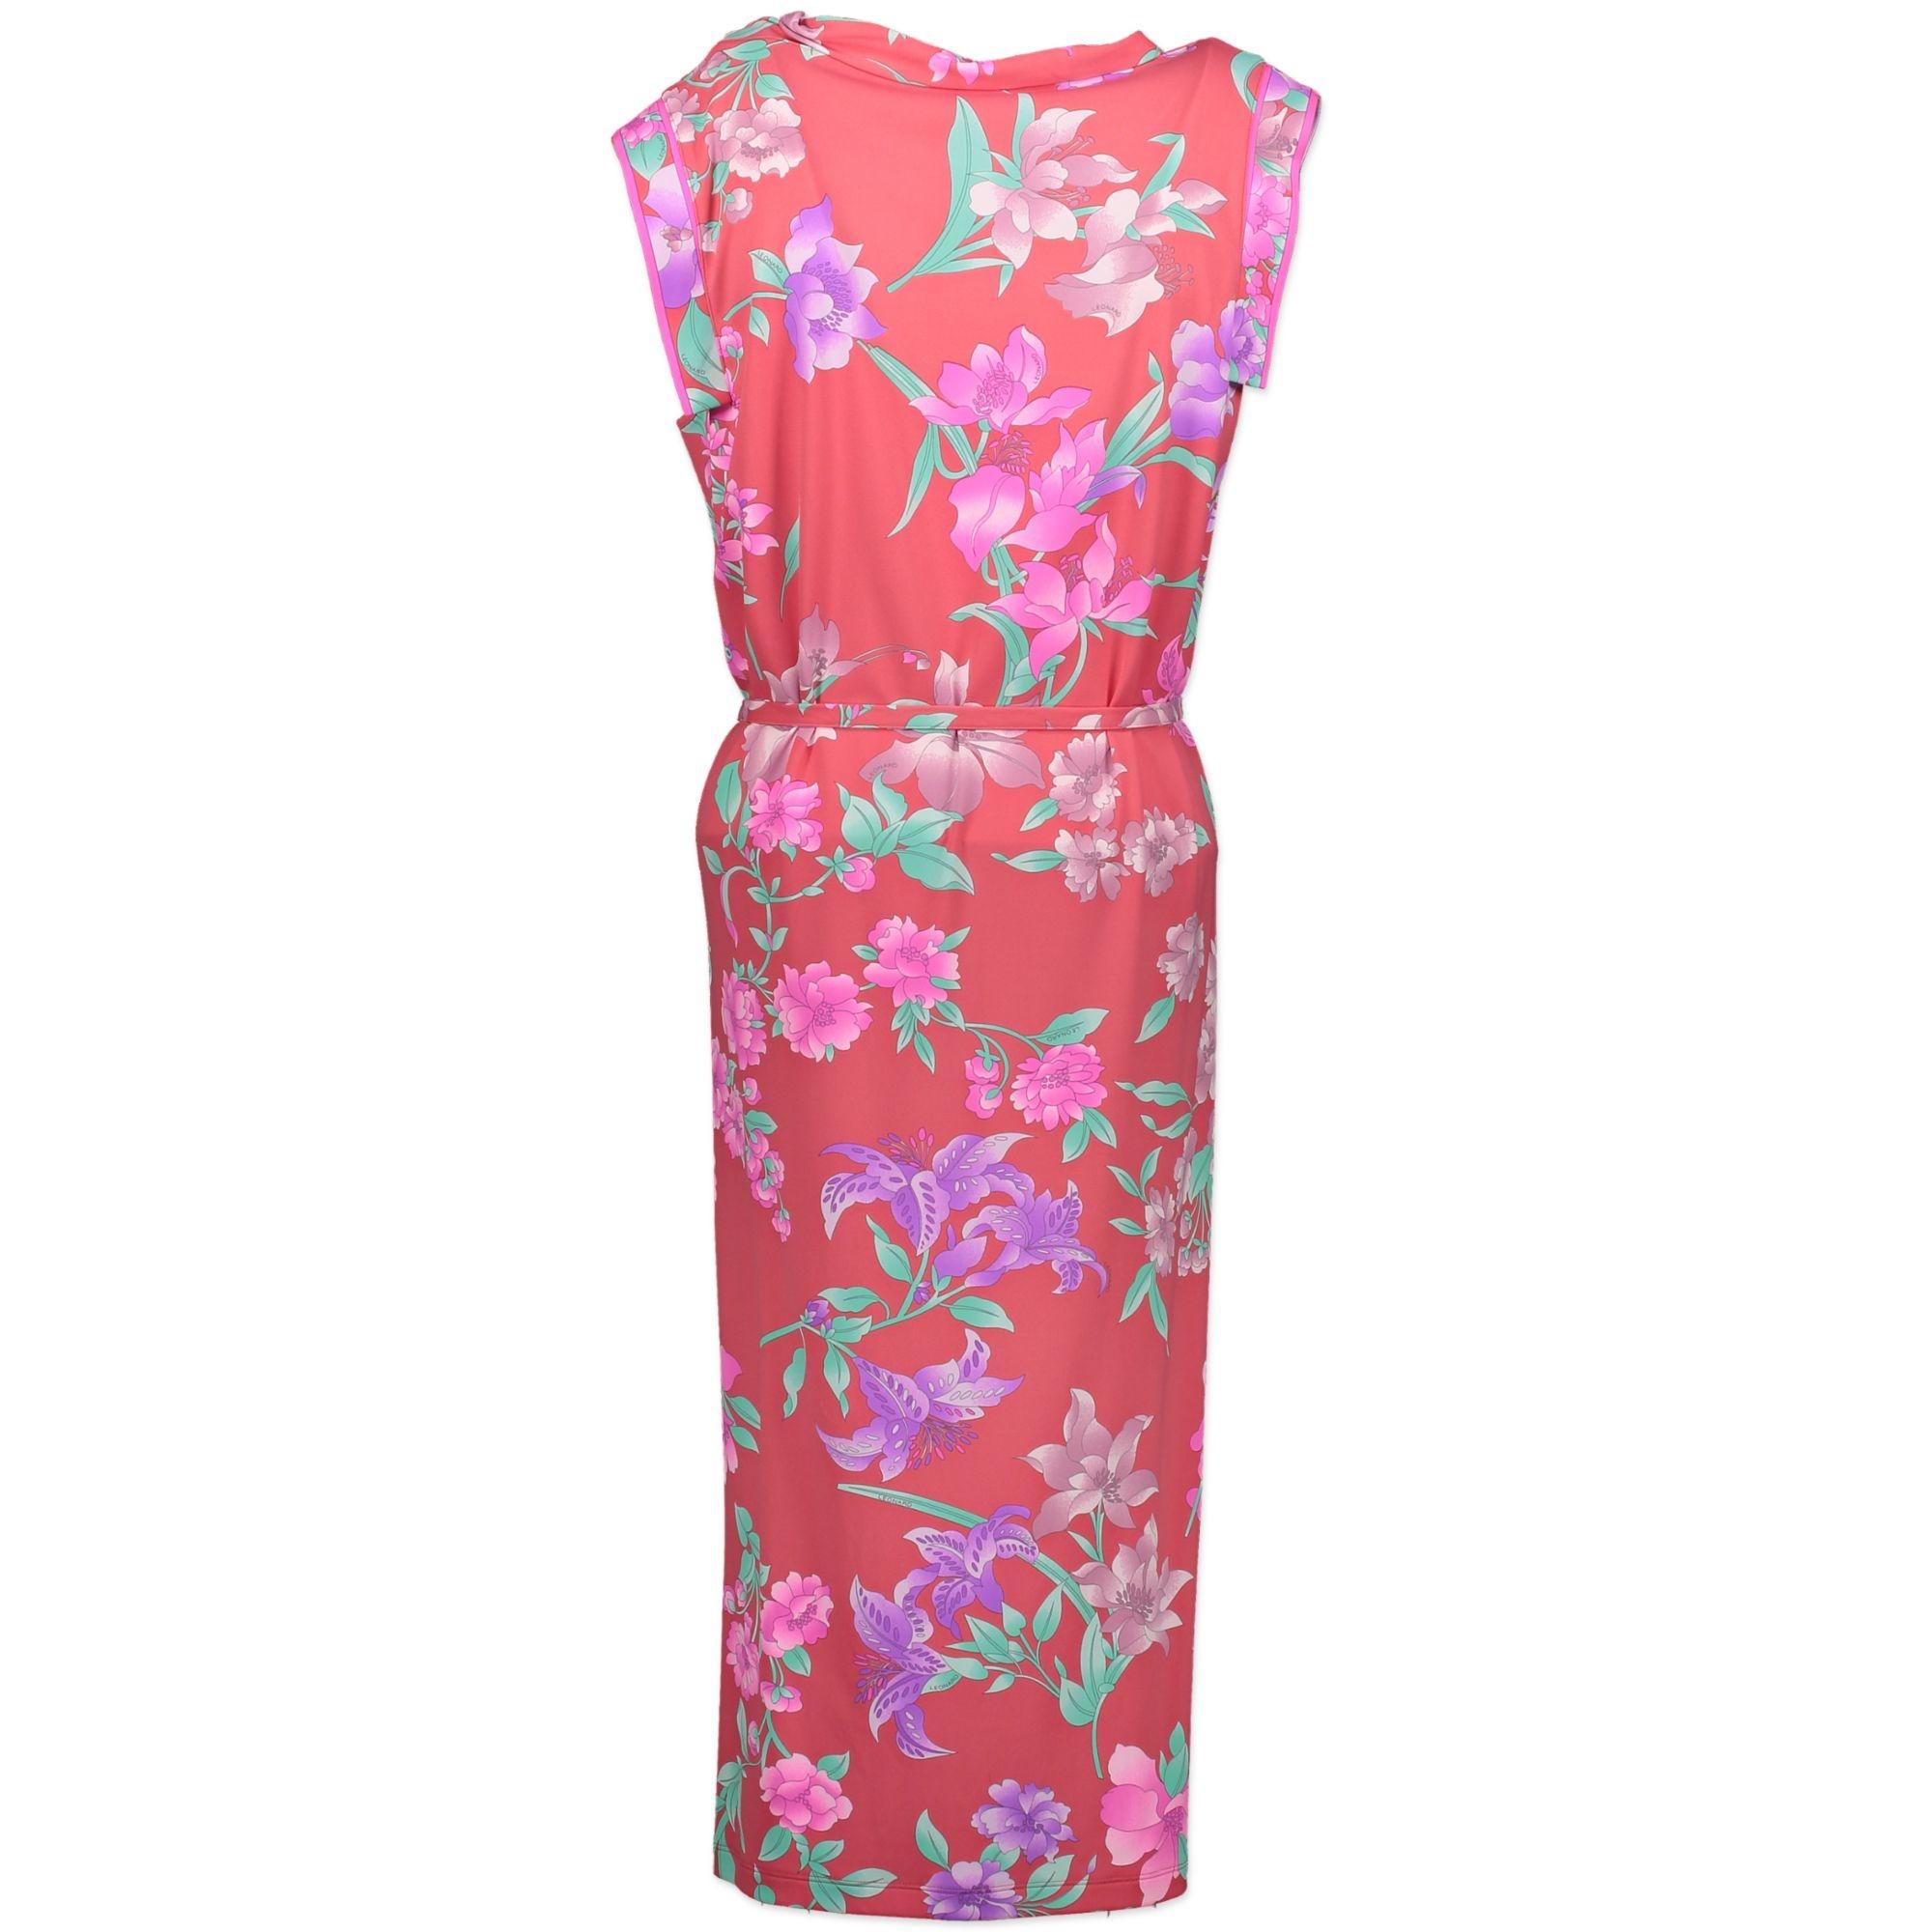 Good condition

Leonard Fuchsia Dress - Size 42

Gorgeous fuchsia dress with flower print is just perfect for summer. This dress is sleeveless, has a rounded neckline and comes with a belt.



Composition:

100% Polyamide